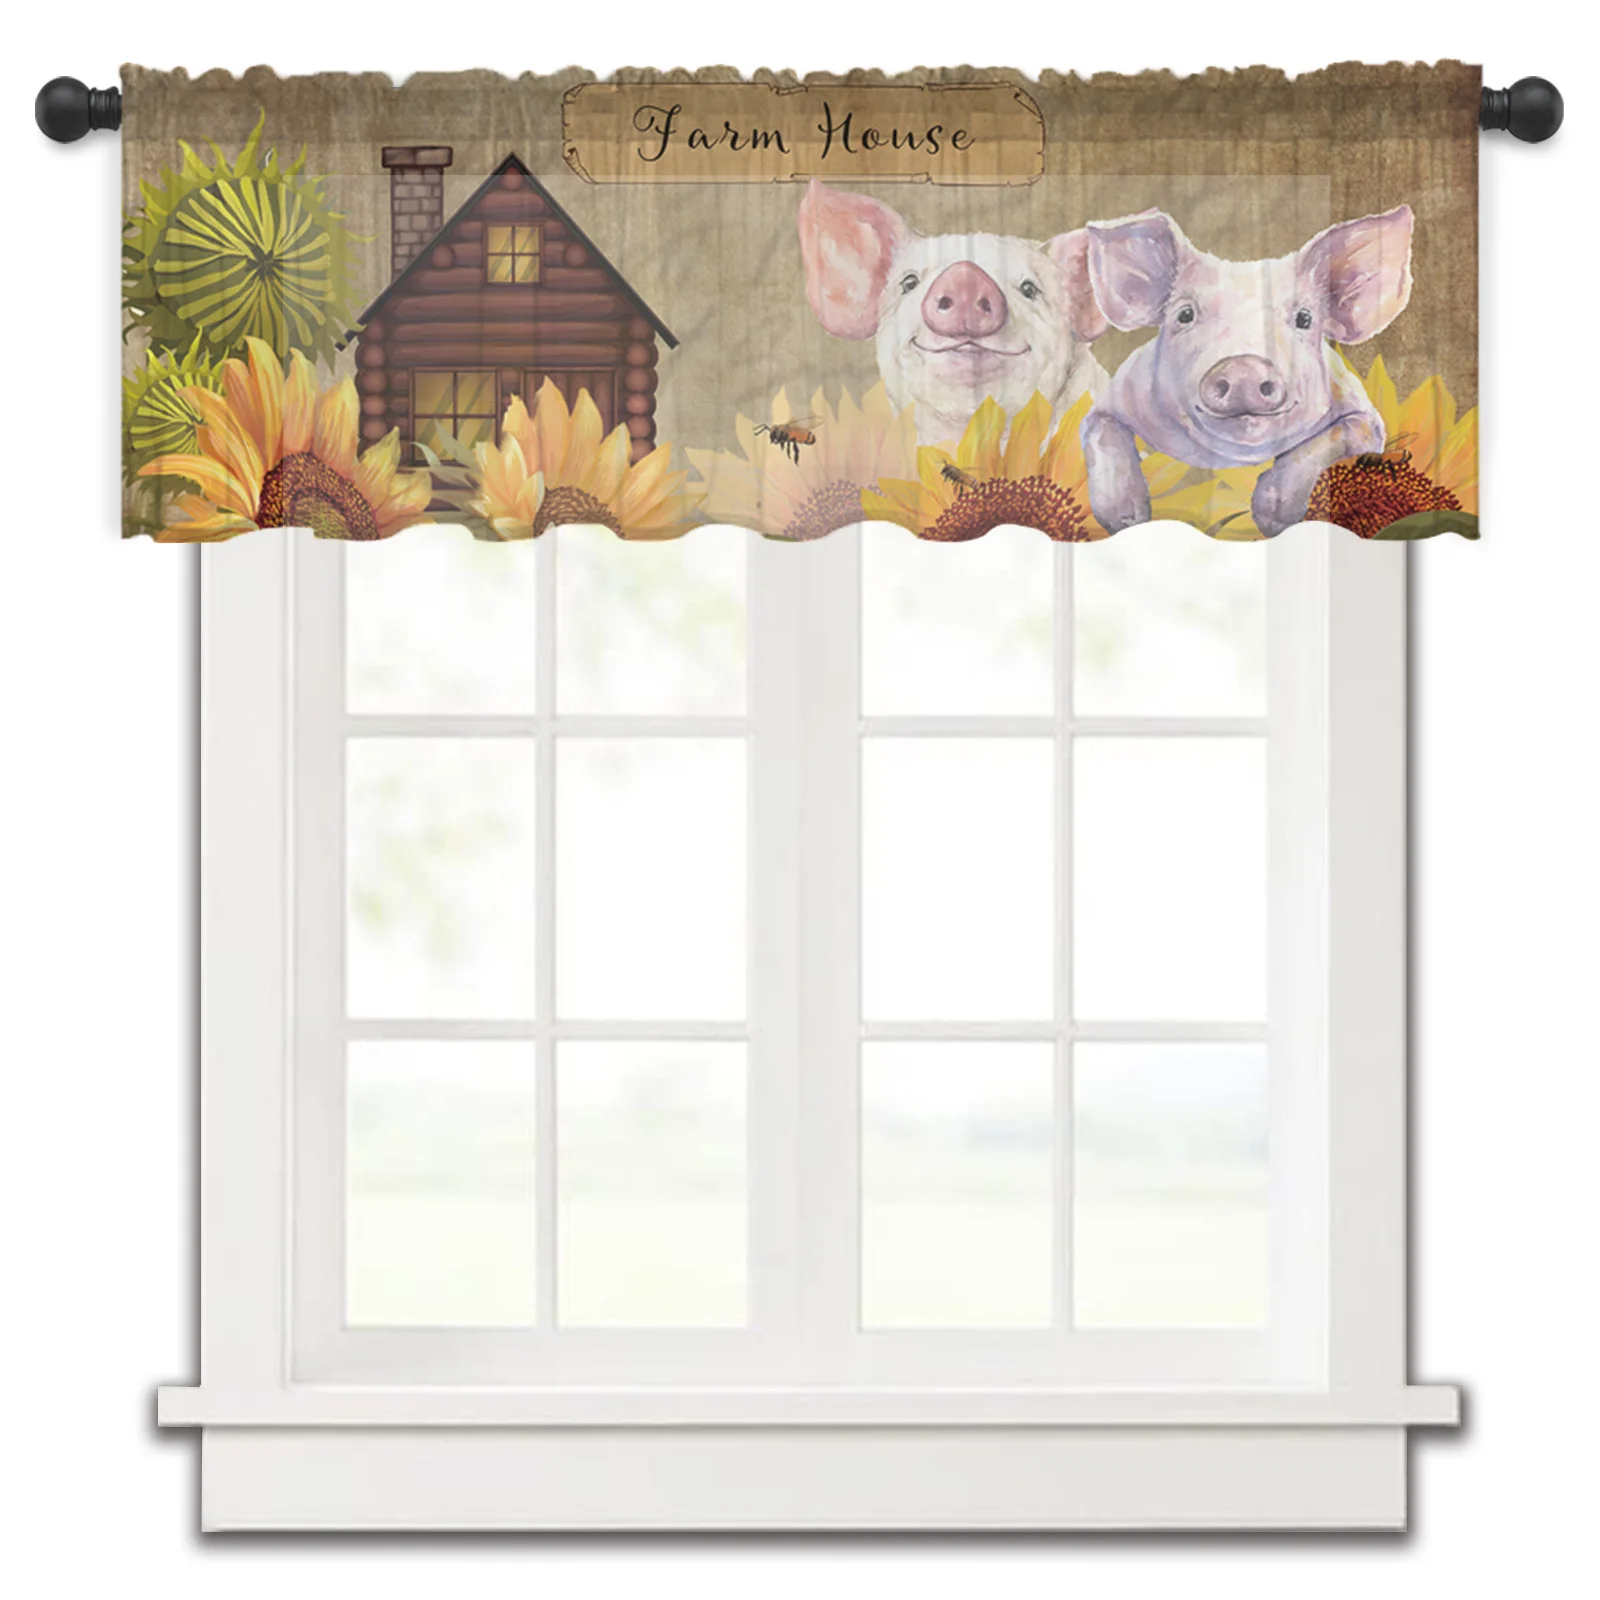 

Farm Sunflower Pig Barn Kitchen Small Window Curtain Tulle Sheer Short Curtain Bedroom Living Room Home Decor Voile Drapes